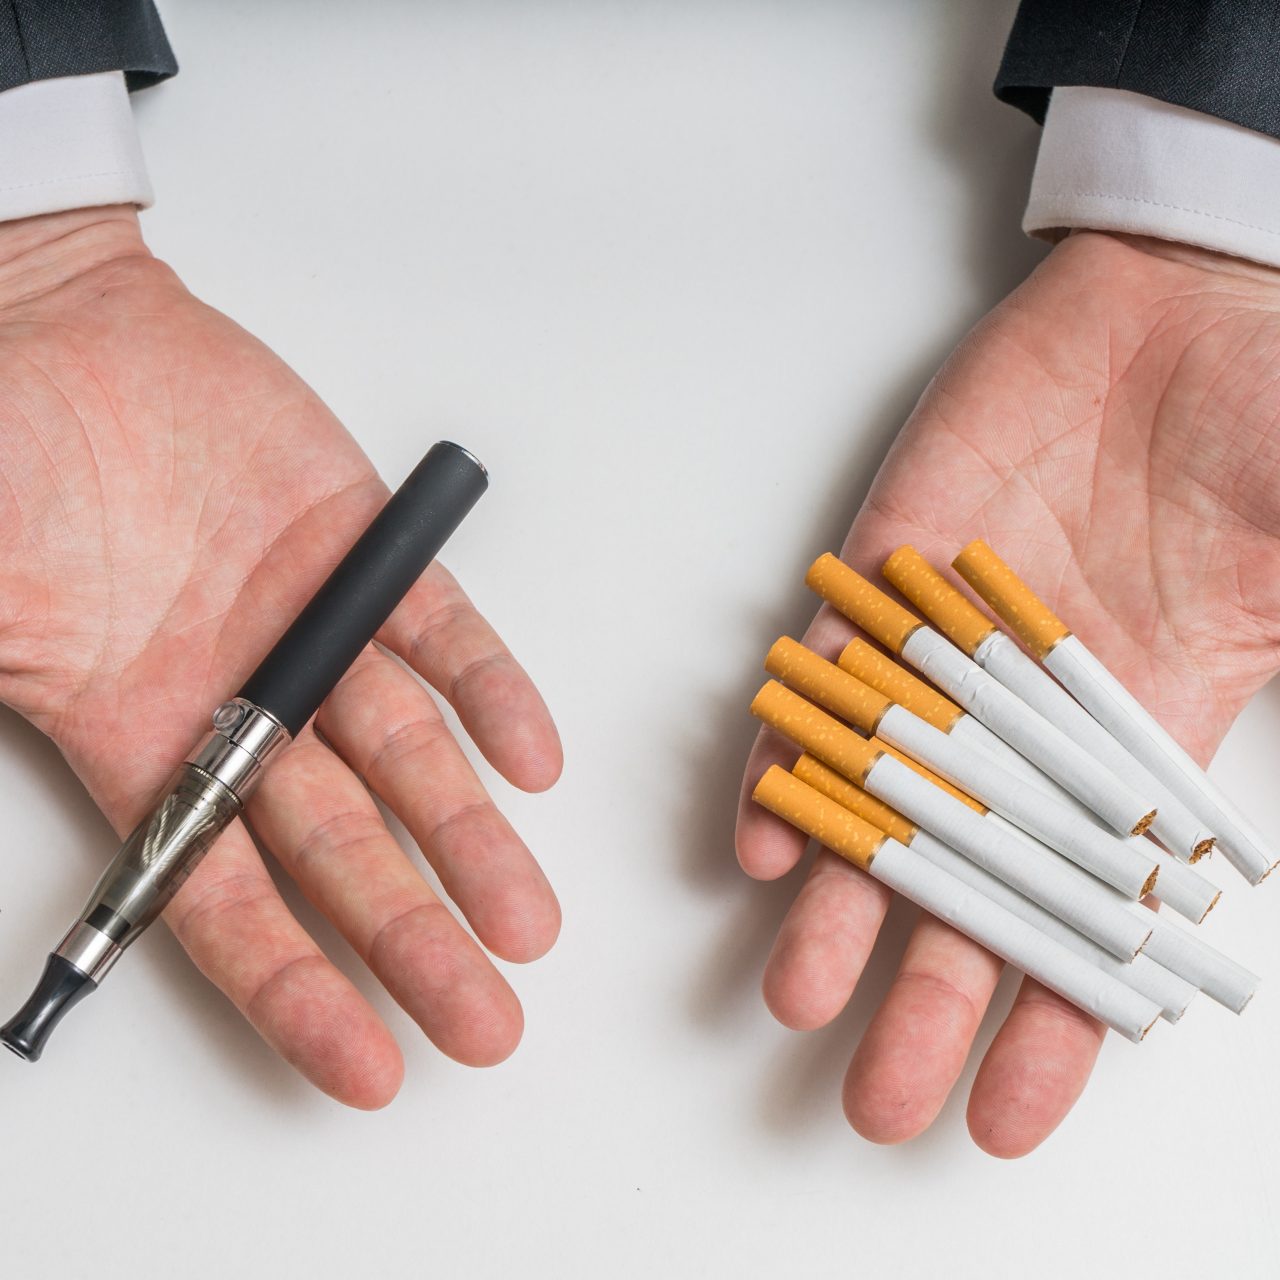 Hands are holding electronic vaporizer and conventional tobacco cigarettes and comparing them.